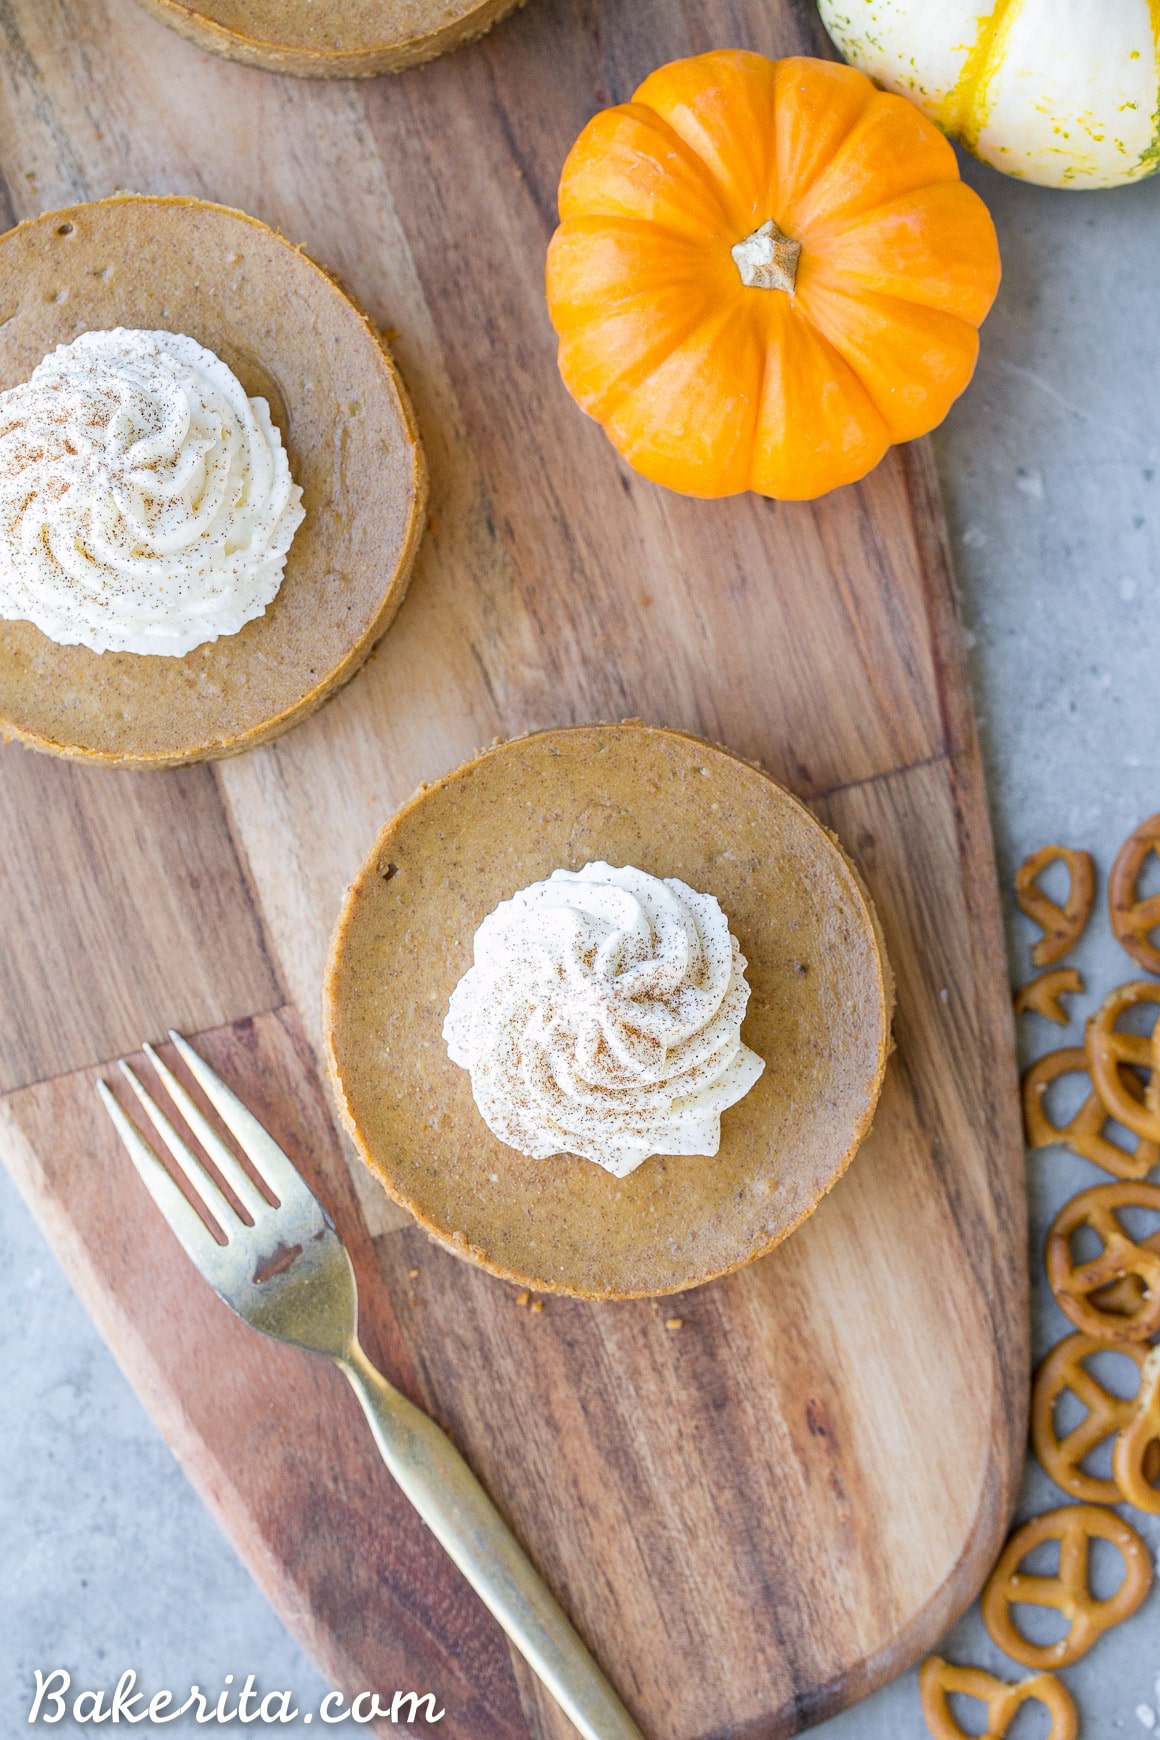 These Mini Pumpkin Cheesecakes have a crunchy, salty pretzel crust that pairs irresistibly well with the spiced pumpkin cheesecake filling! Topped with a swirl of whipped cream, this is a gluten-free dessert everyone will go nuts for - it's perfect for the holidays.